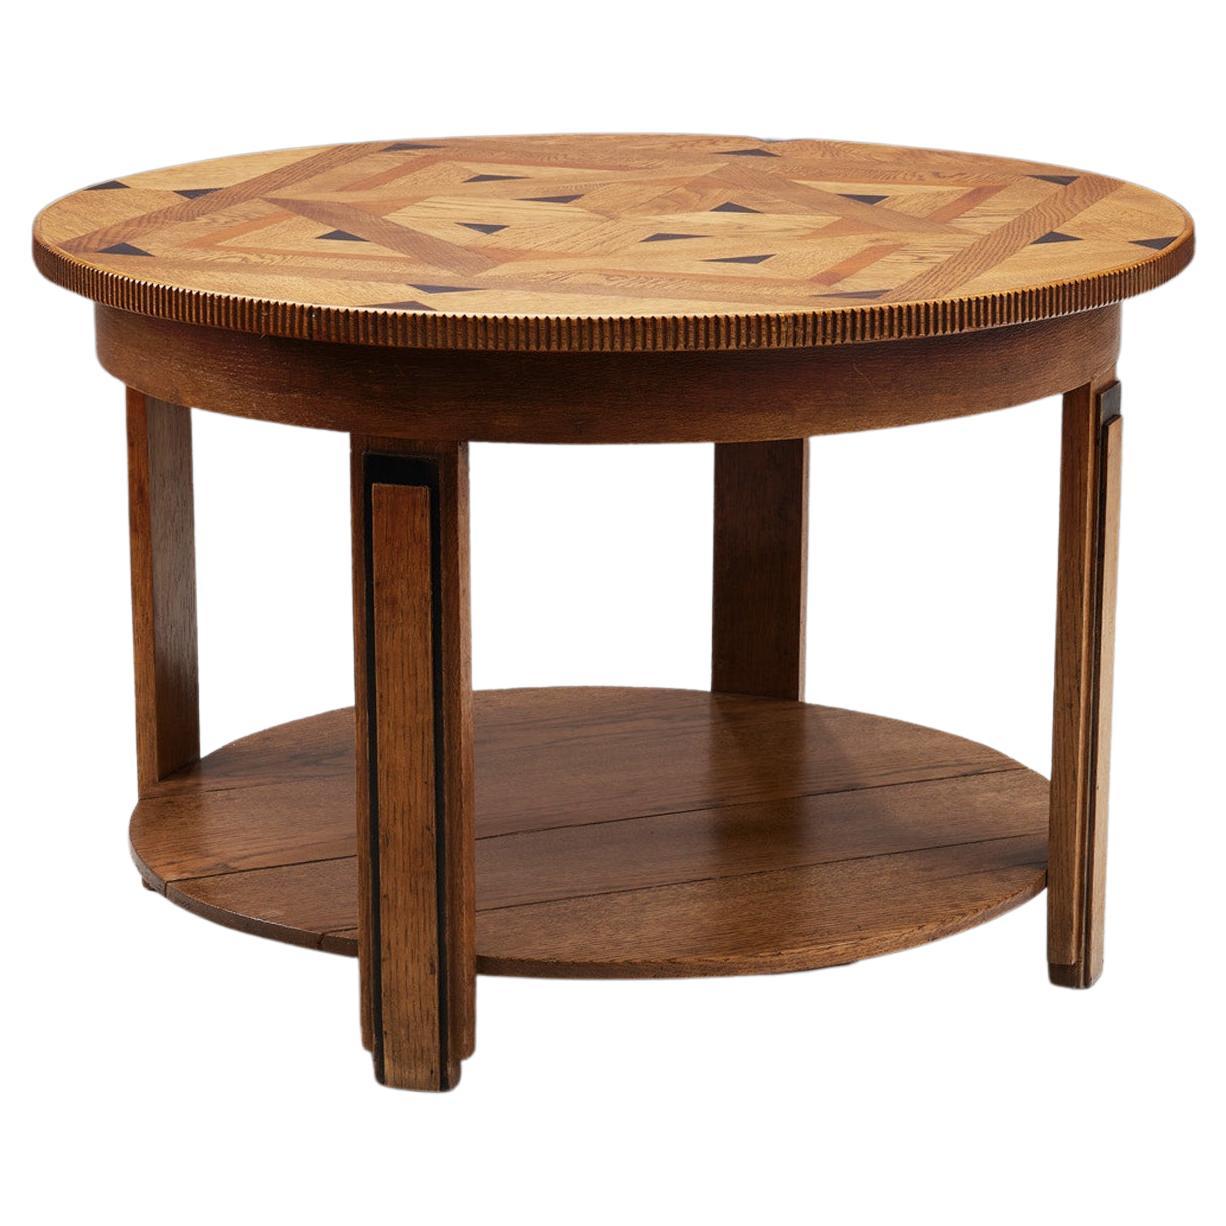 Round Art Deco Coffee Table with Intarsia, the Netherlands, 1930s For Sale